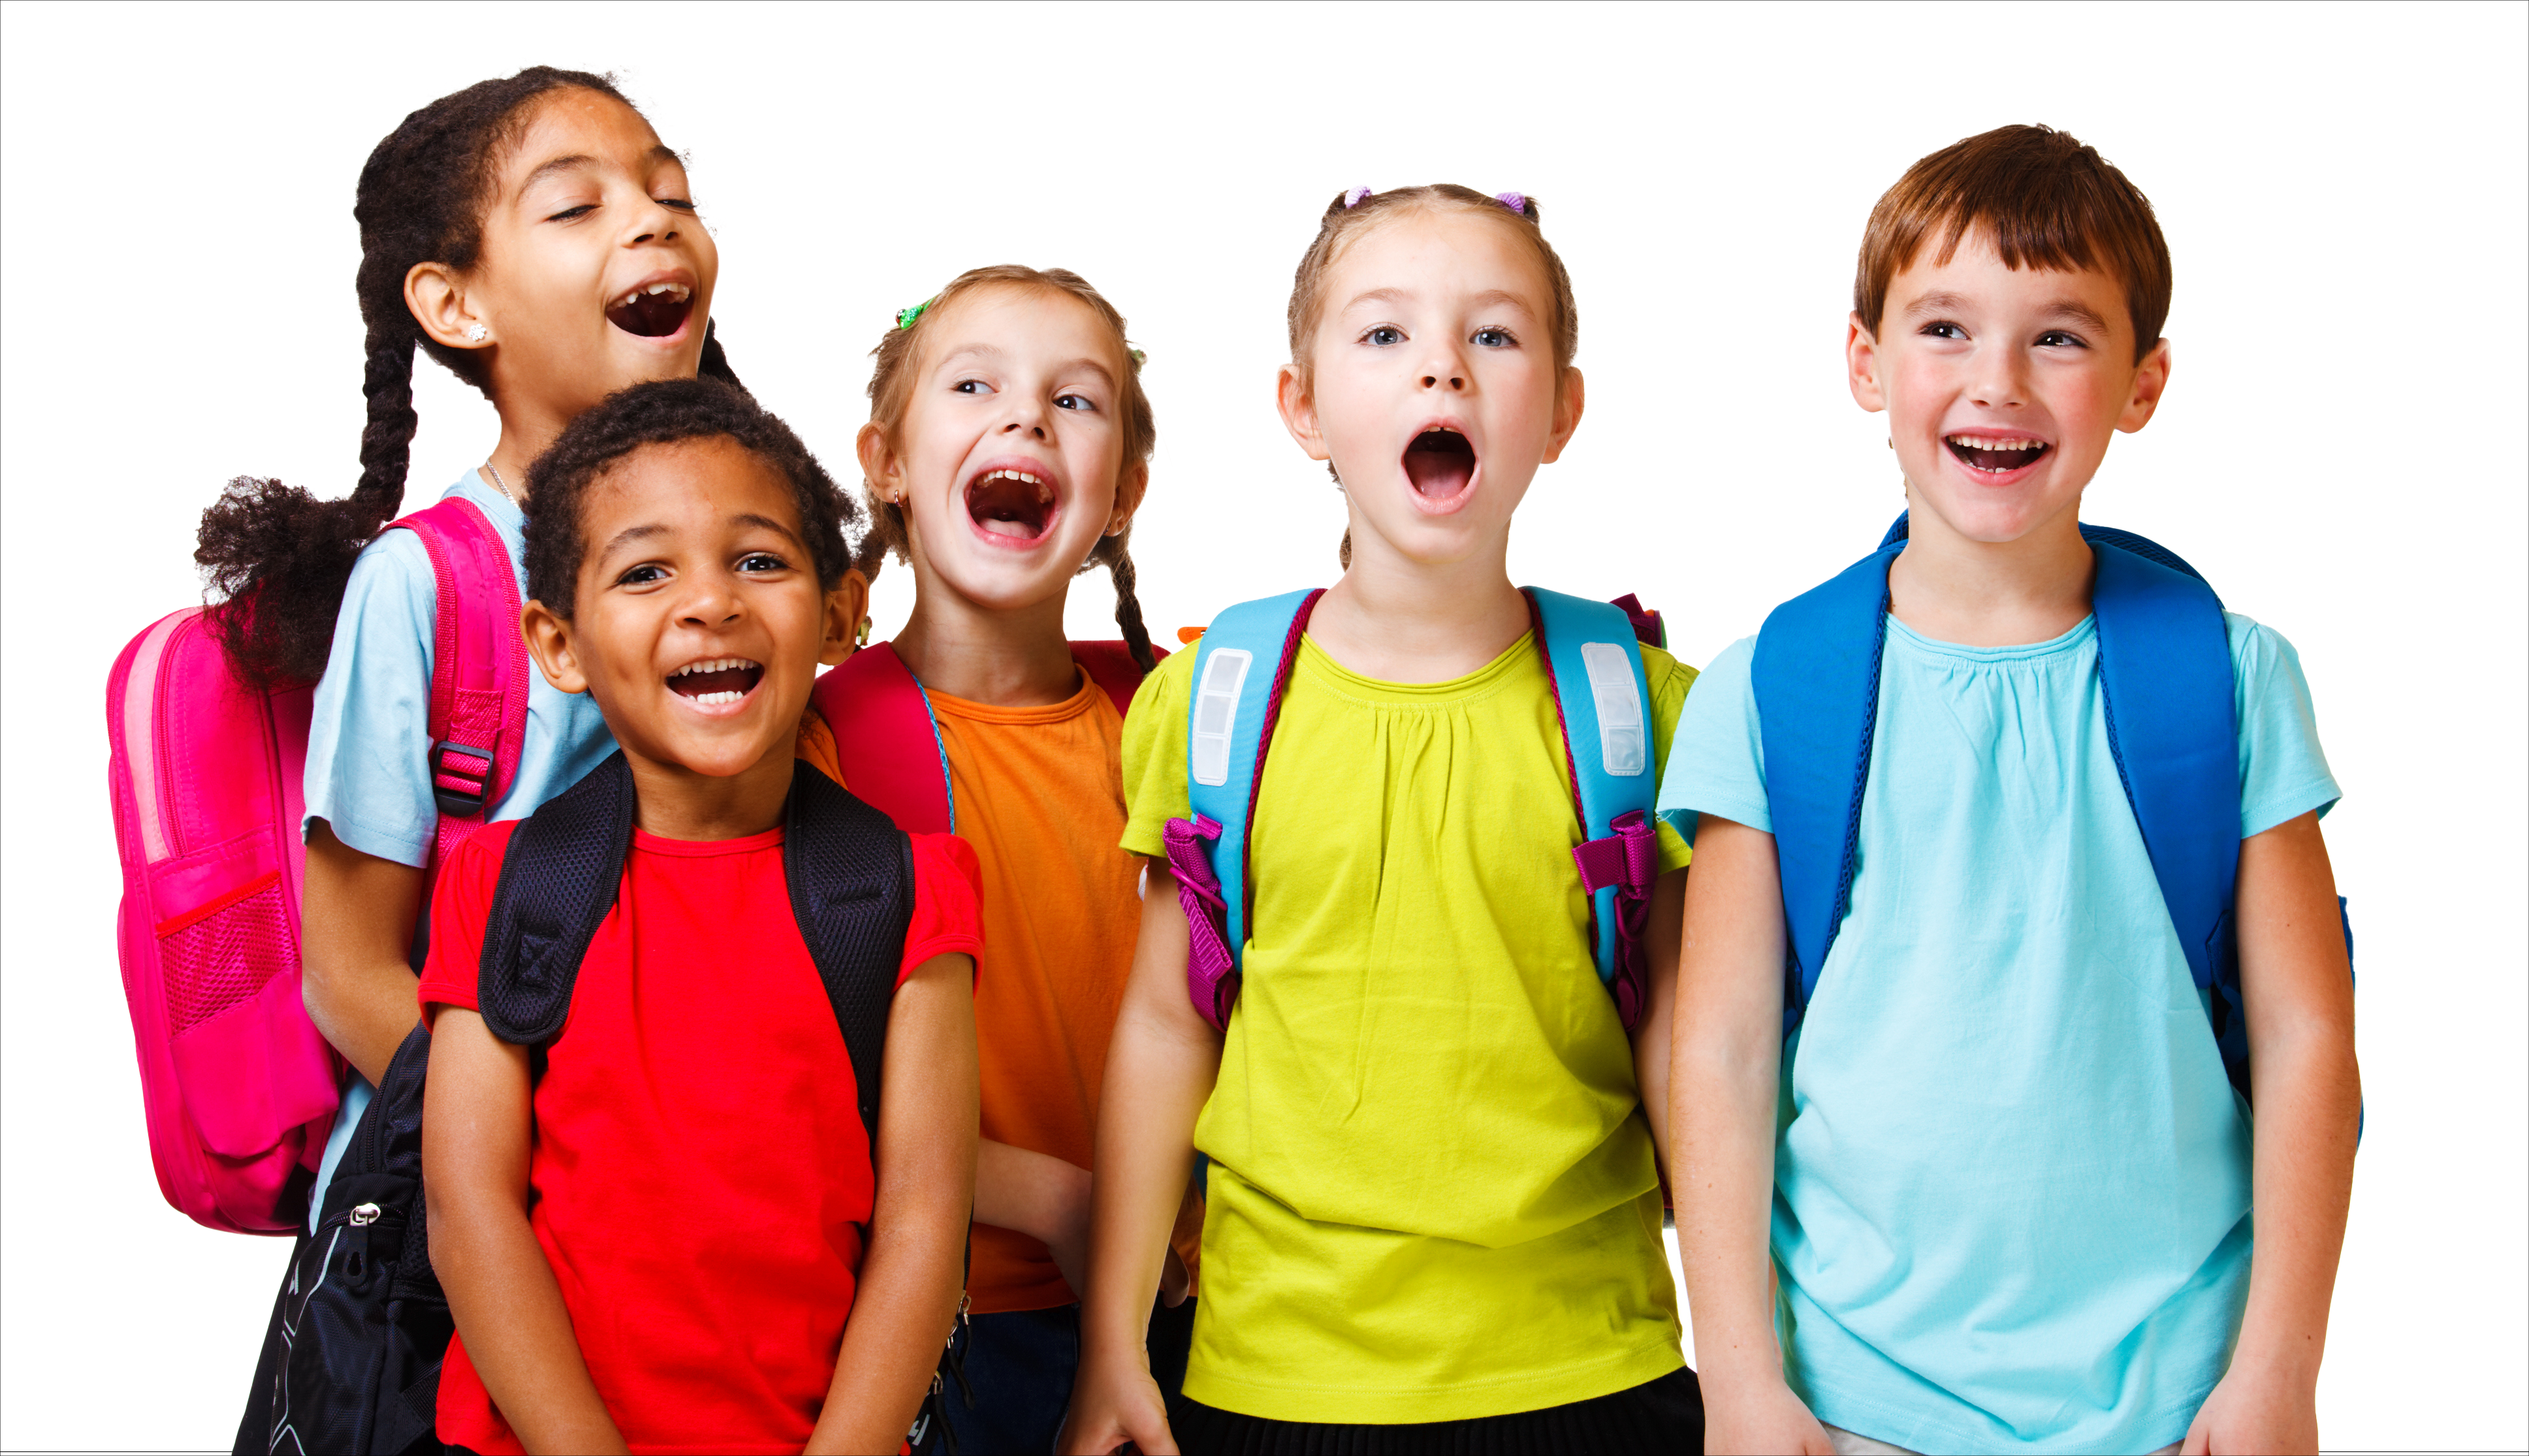 Group of young schoolchildren wearing backpacks and making funny faces.